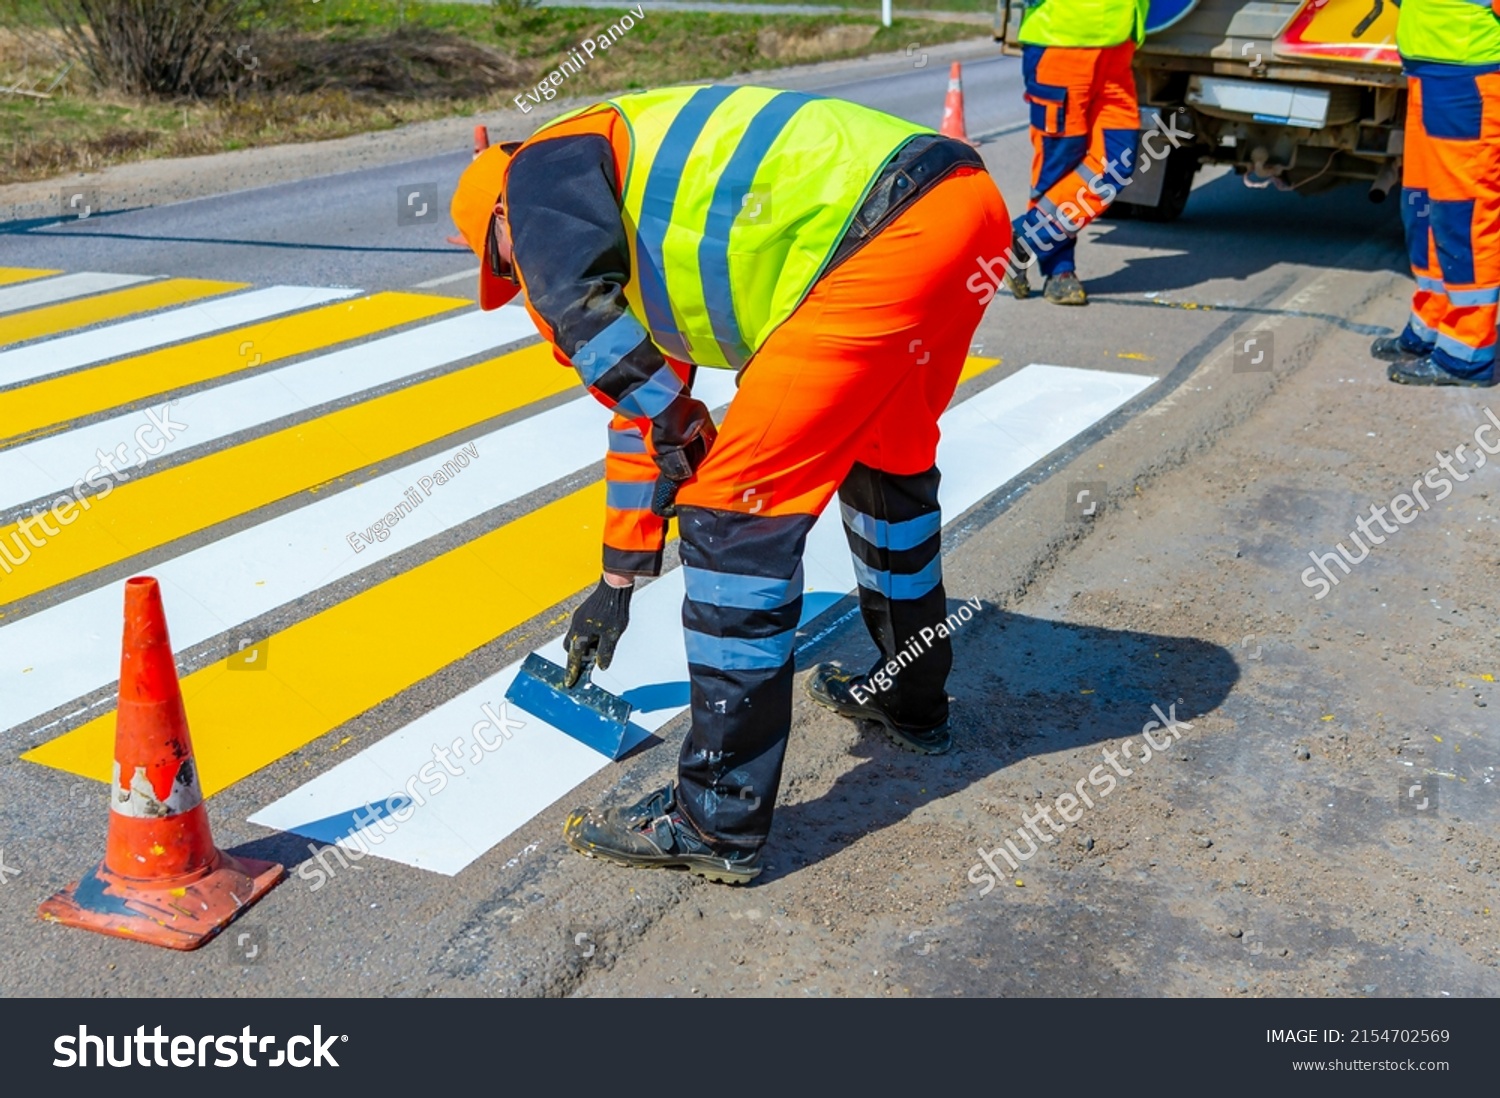 A road worker paints, repairs a pedestrian crossing on an asphalt surface on a city street. #2154702569